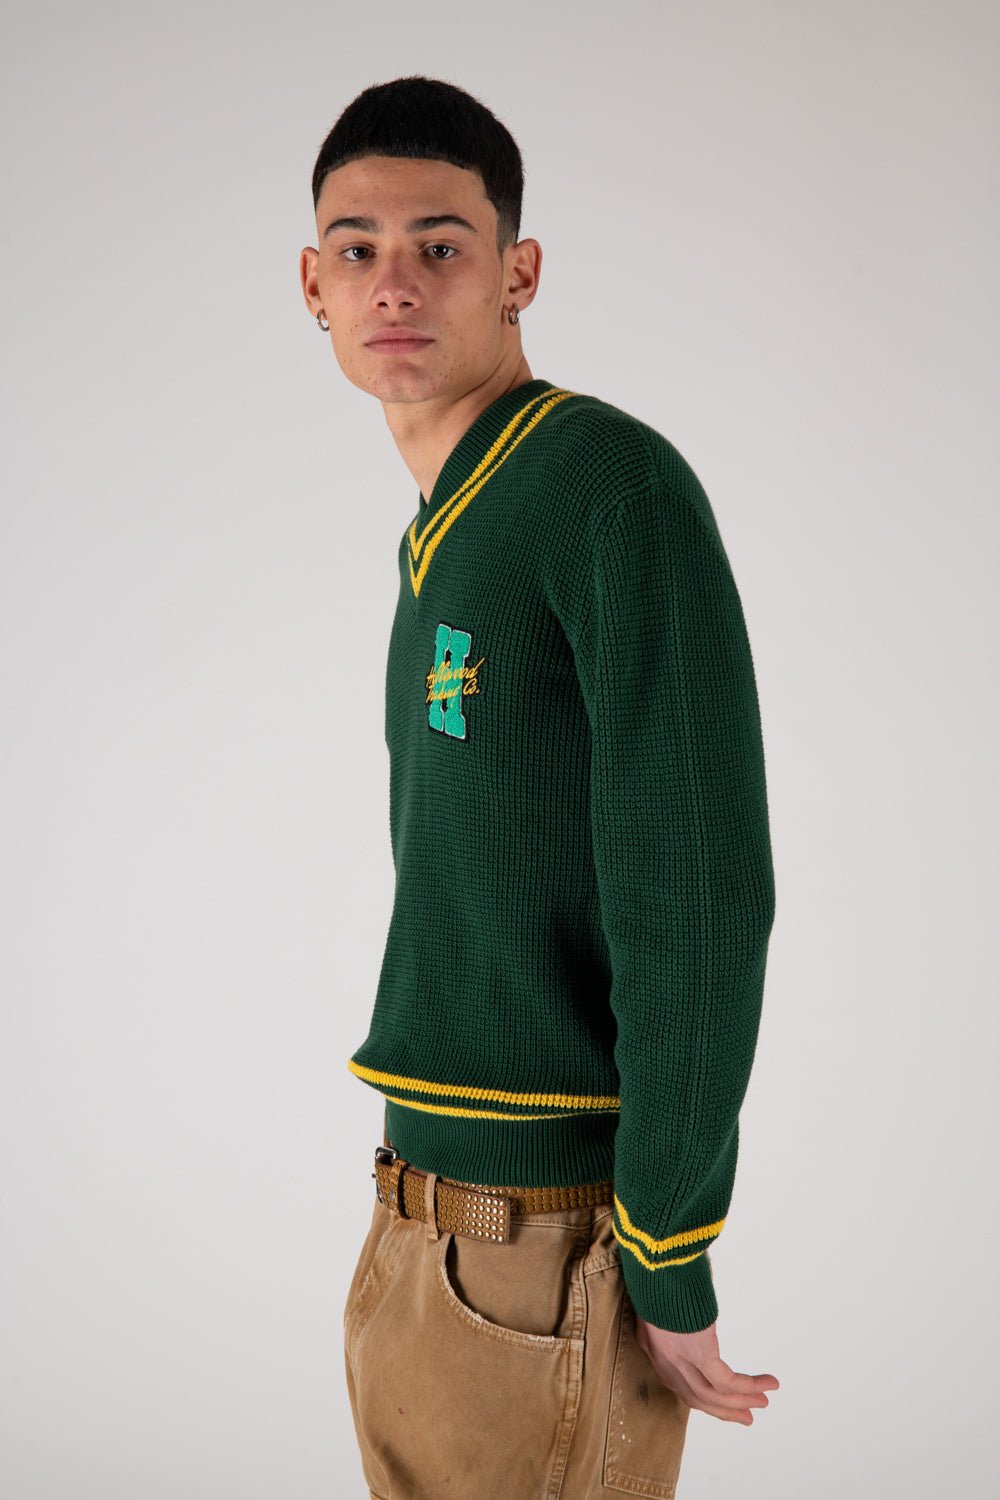 VISITOR Green sweater with front logo patch. Composition: 100% Cotton HTC LOS ANGELES